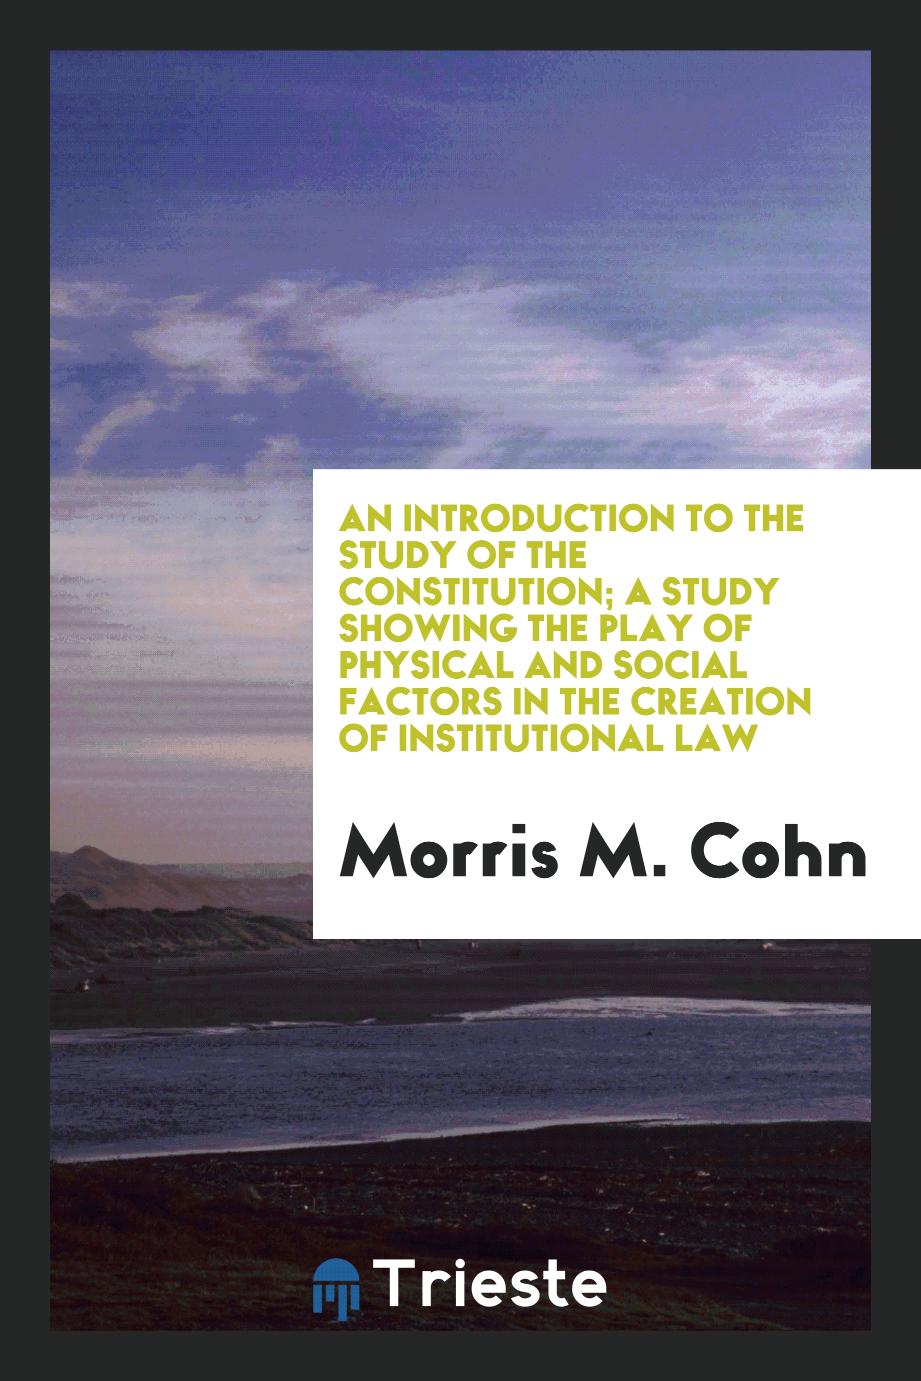 An introduction to the study of the Constitution; a study showing the play of physical and social factors in the creation of institutional law